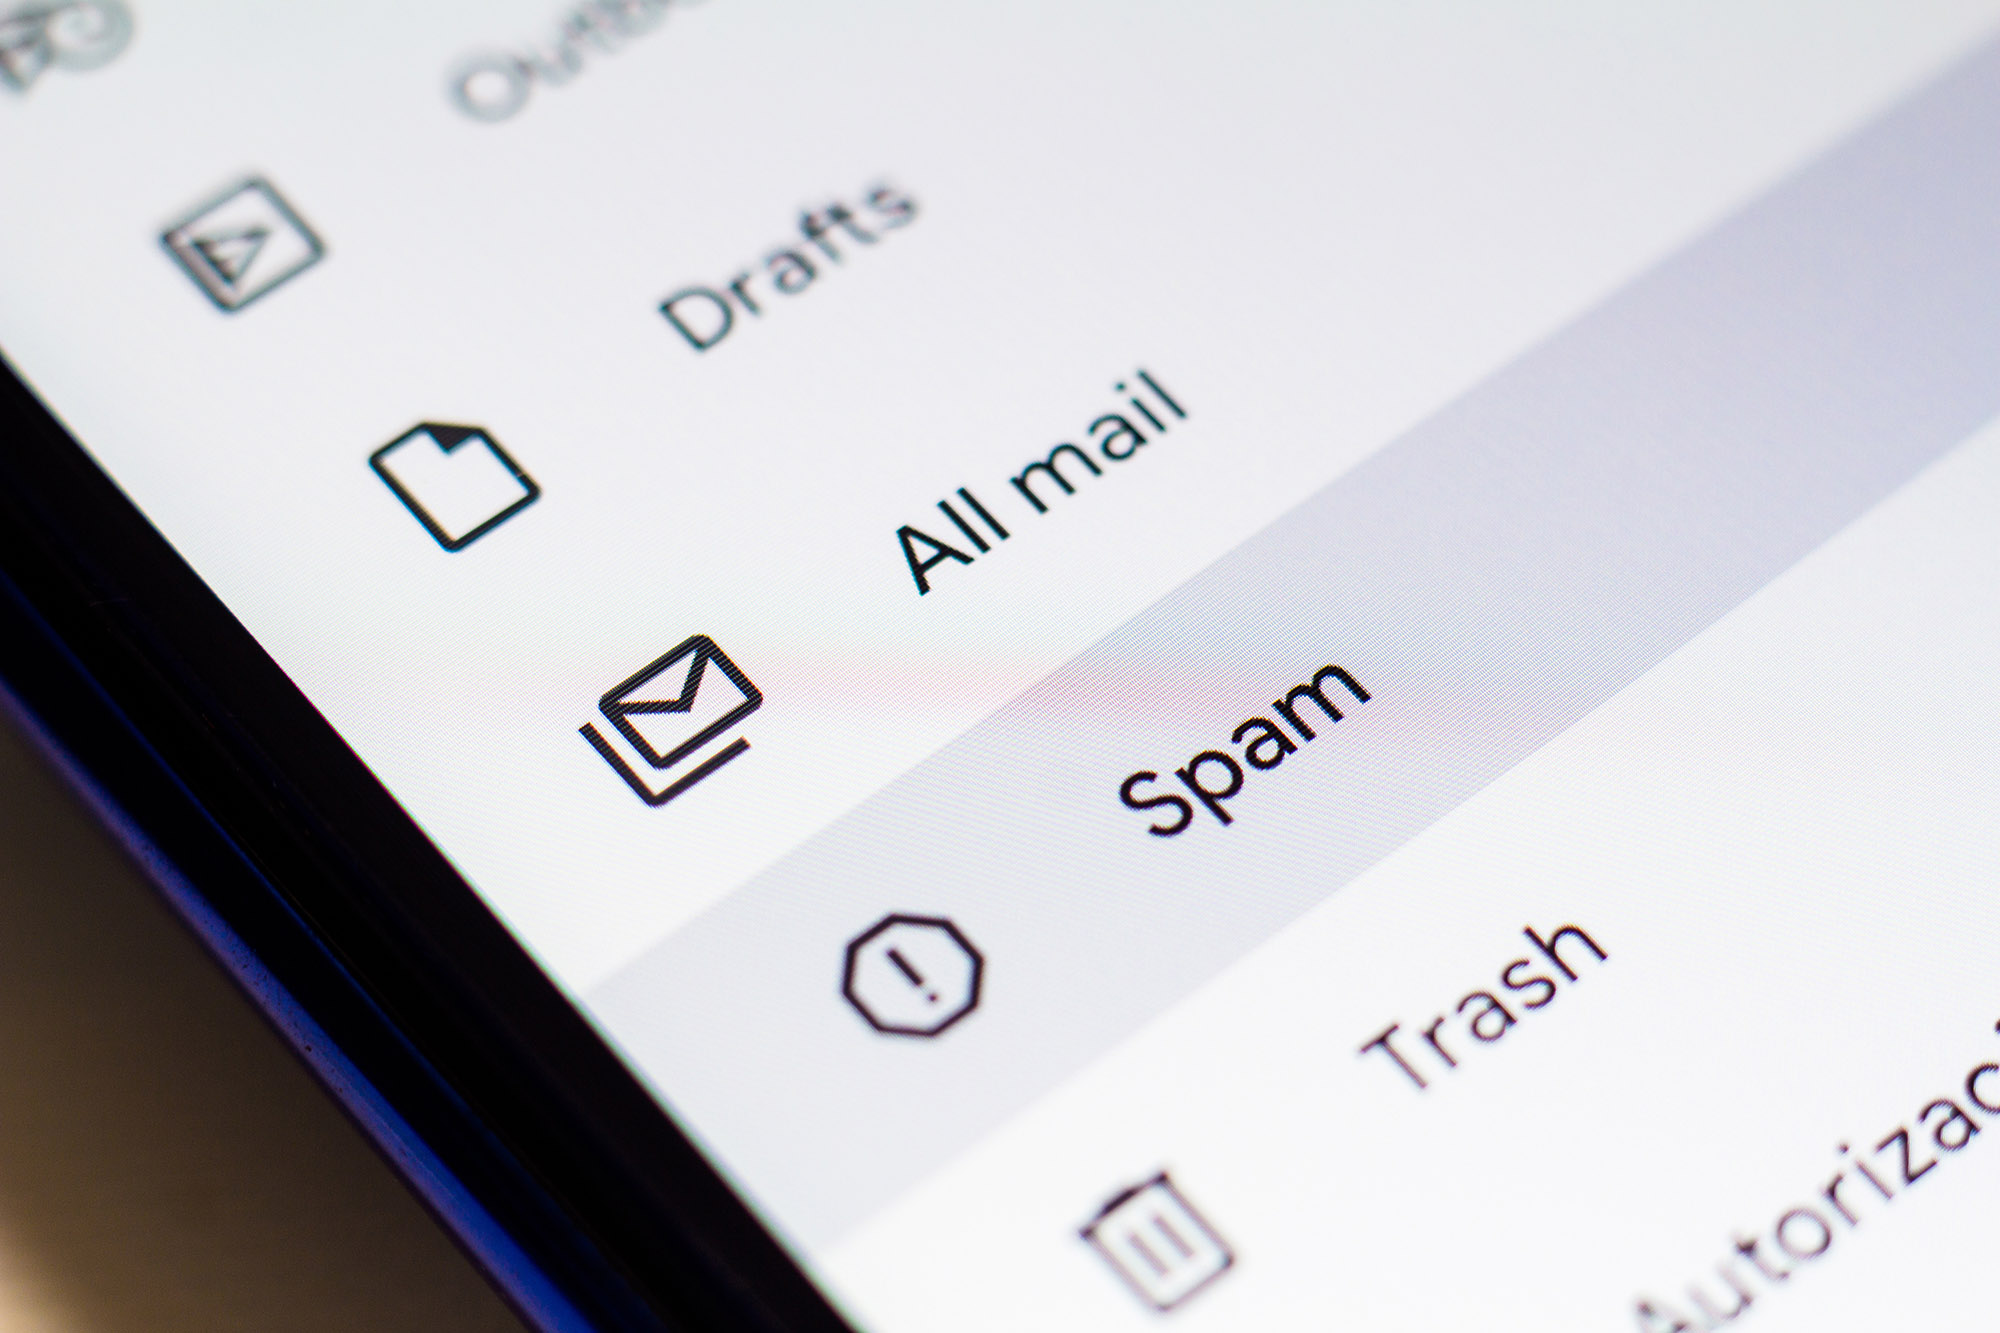  Getting more spam texts and emails? Heres how to fix it